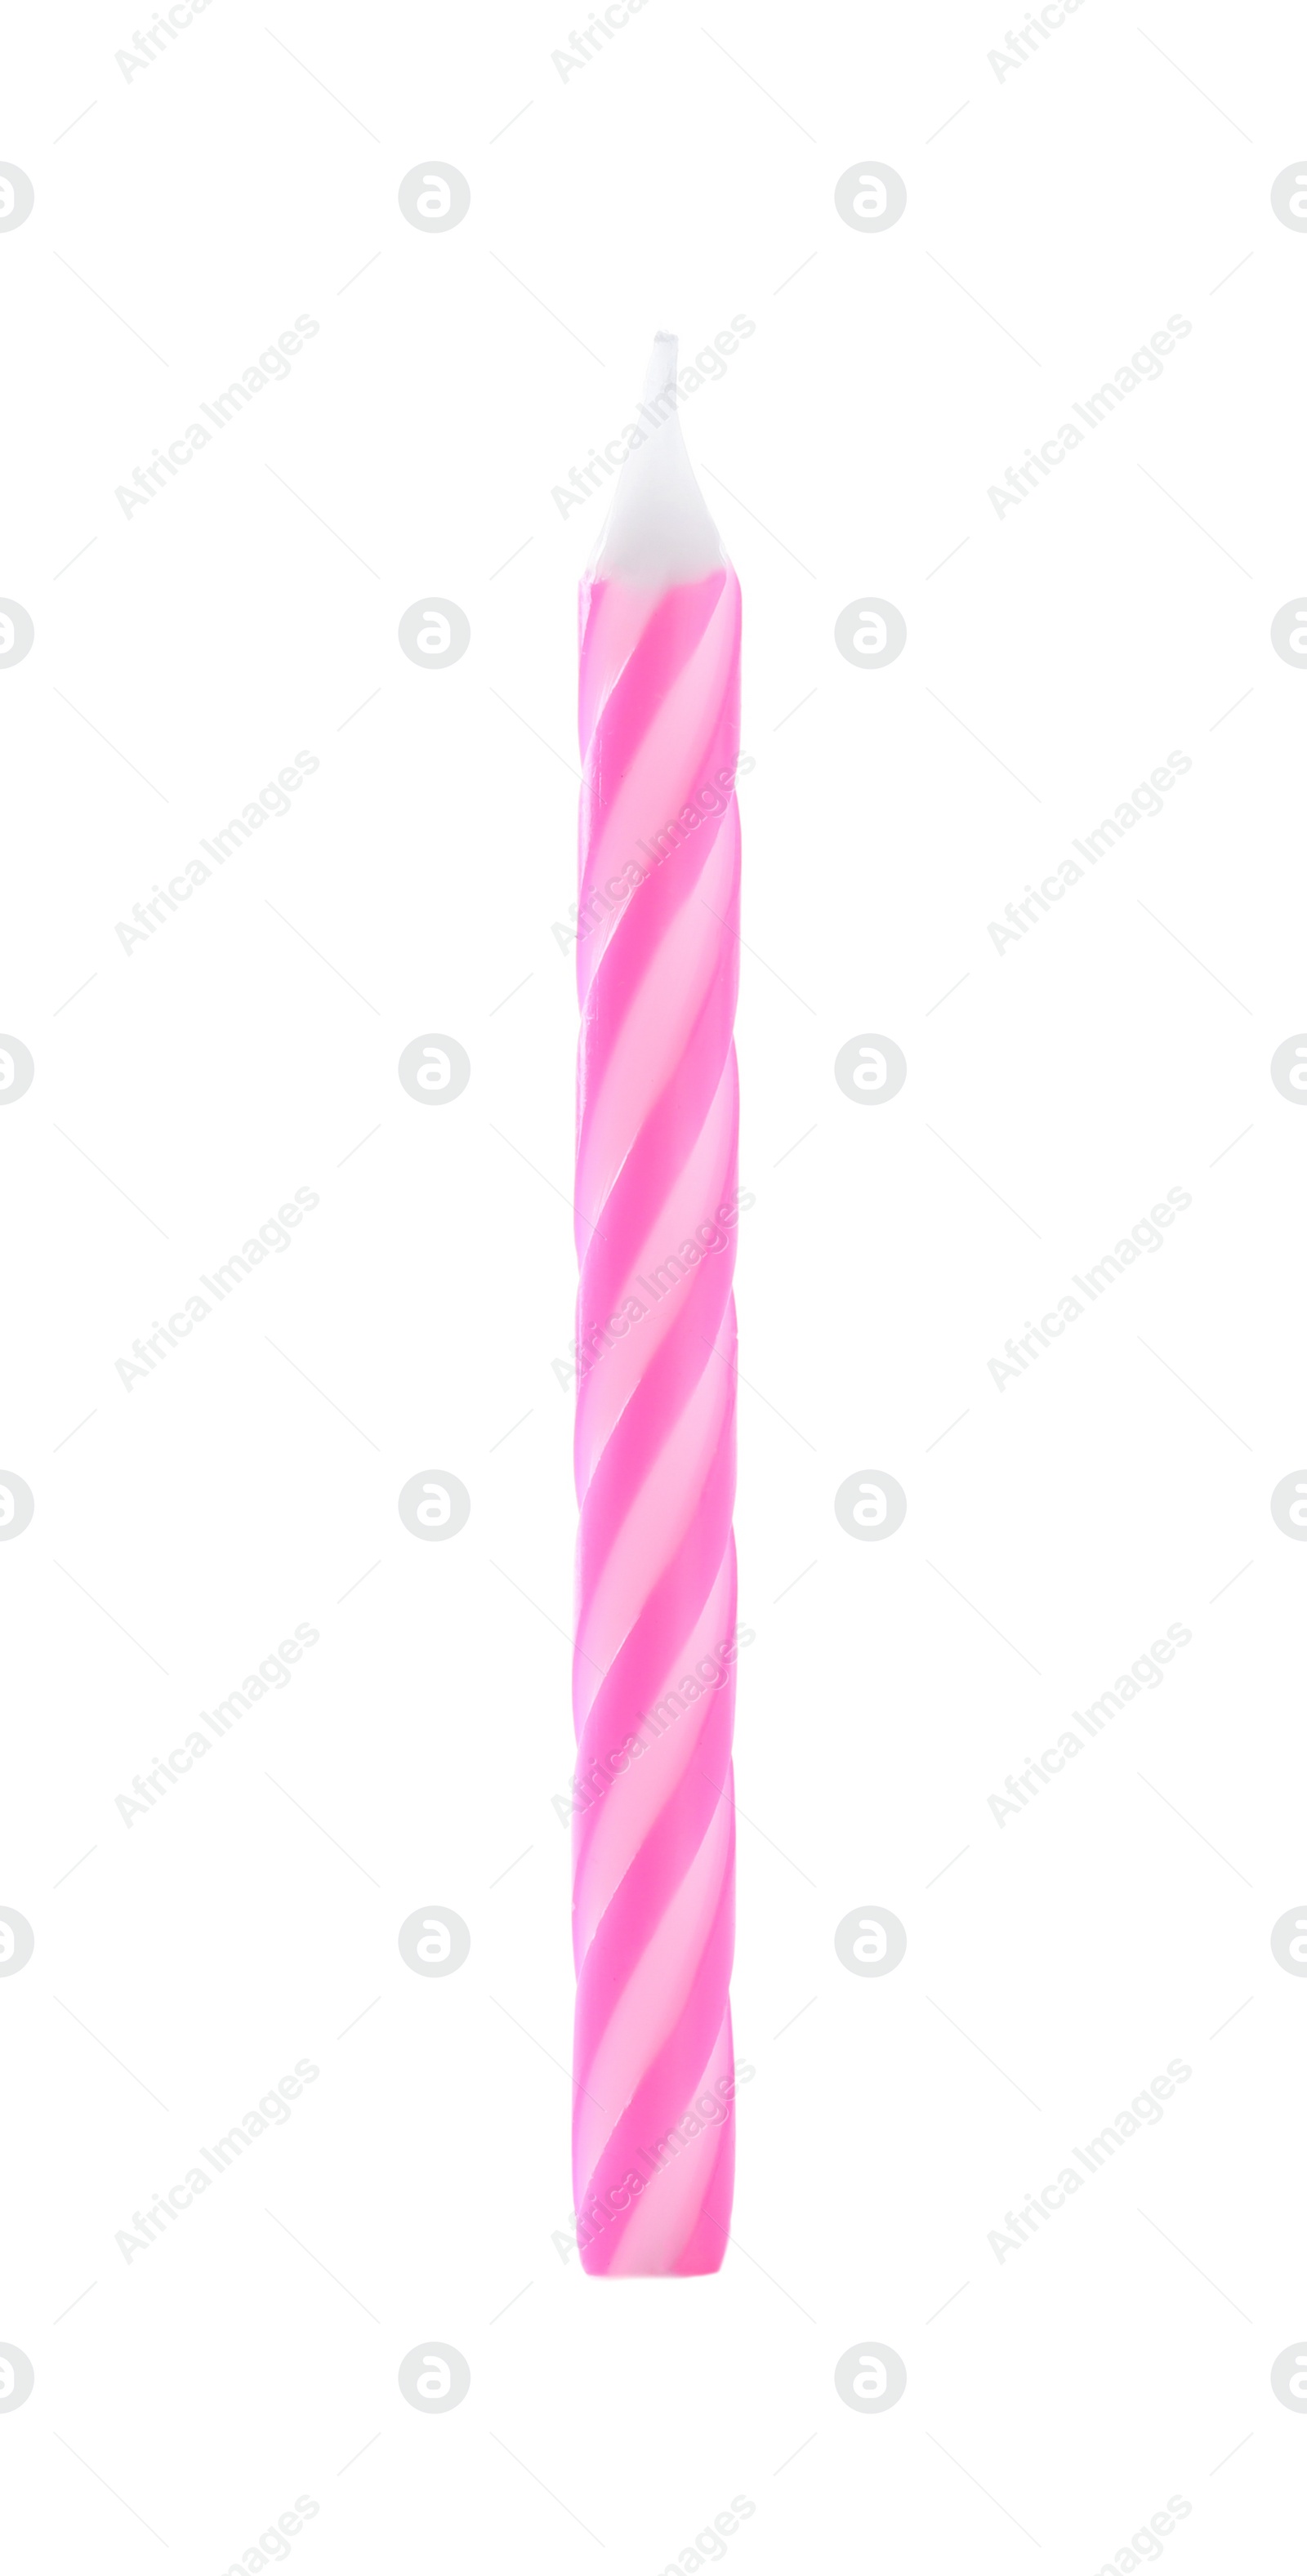 Photo of Pink striped birthday candle isolated on white